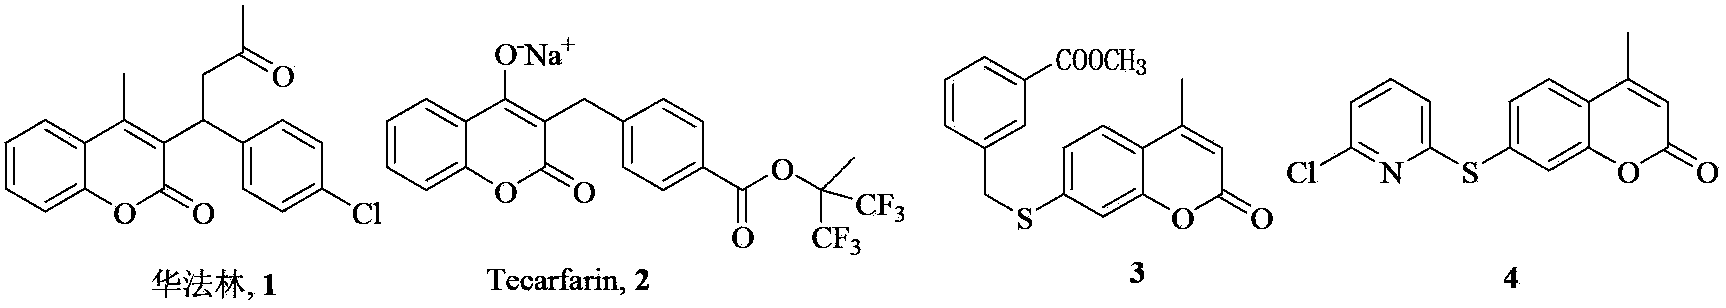 7-oxy, thio or imino substituted coumarin, and derivatives and applications thereof